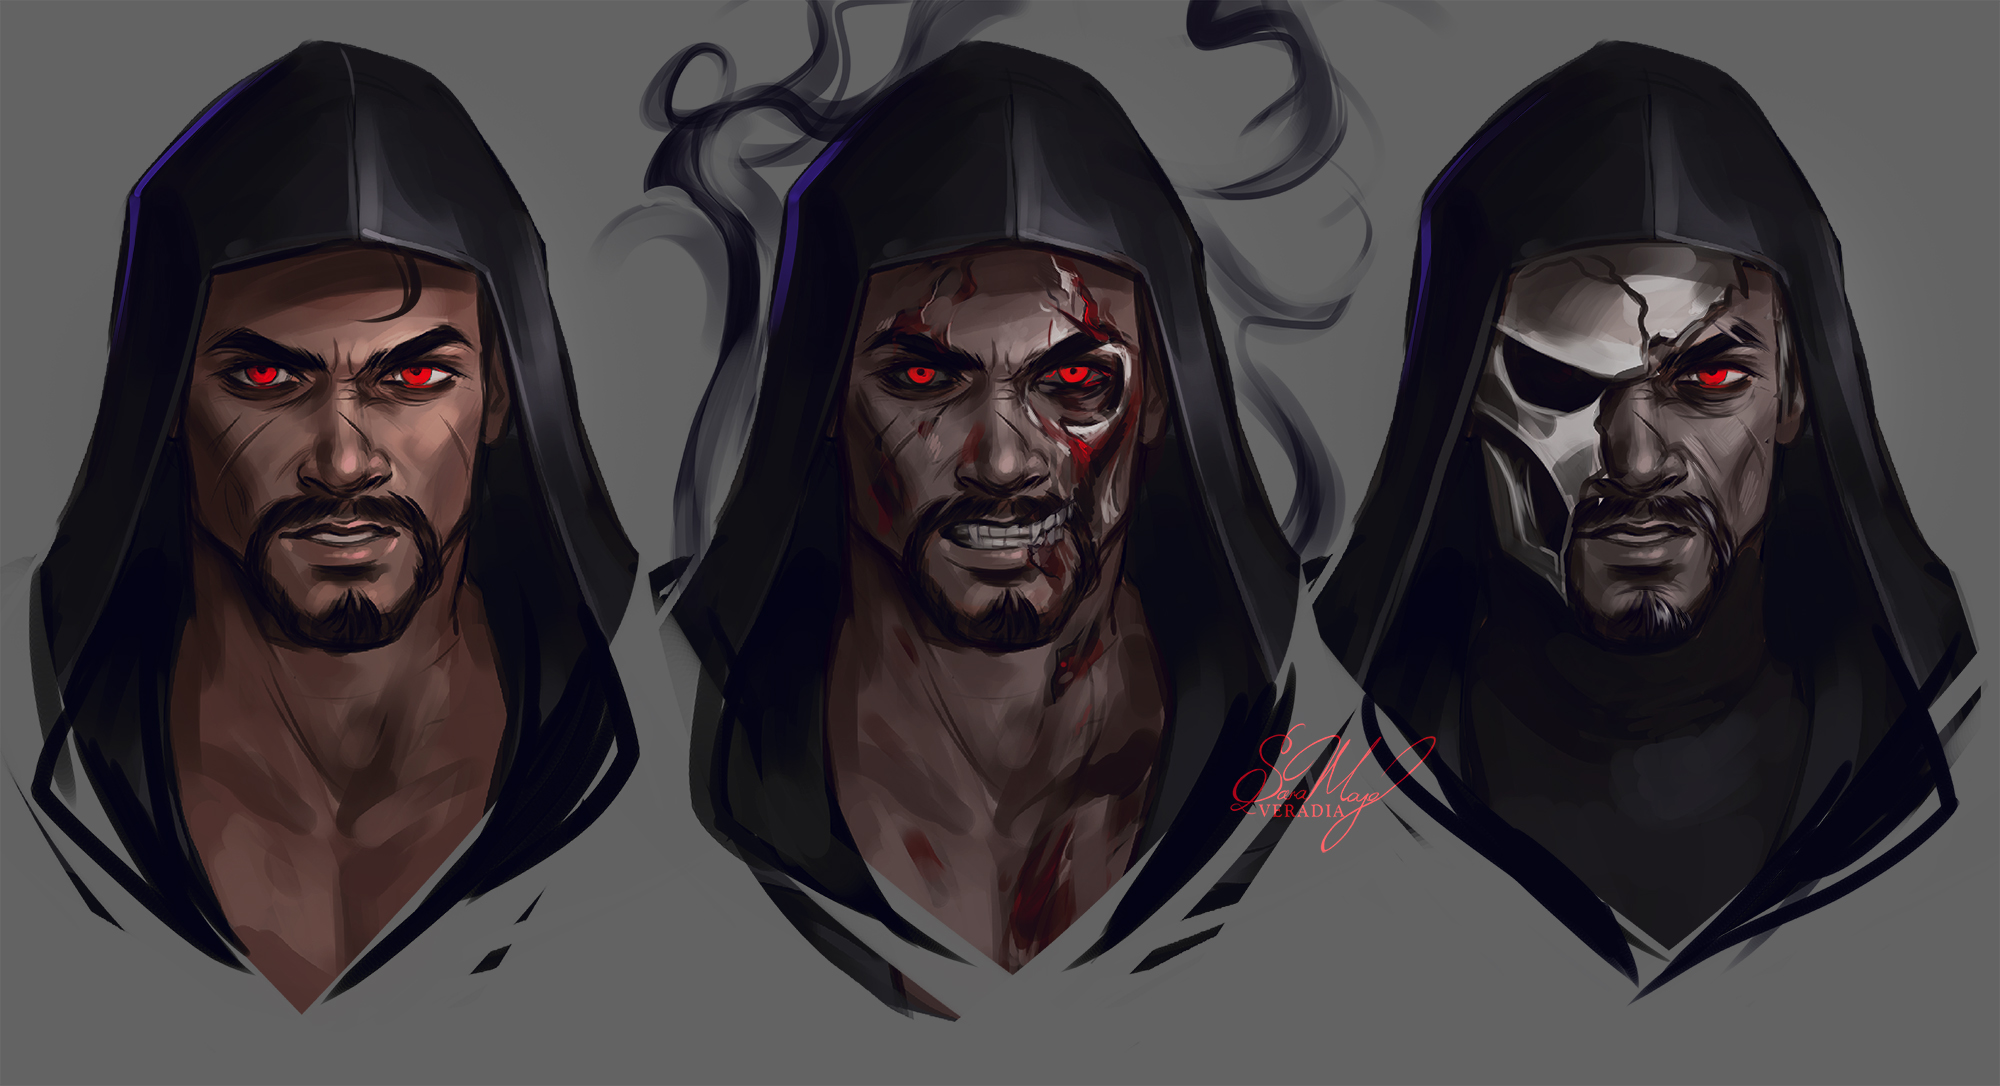 undertøj antenne golf Sara 💜 on Twitter: "forgot to upload these reaper unmasked concepts from  last year 🥺🖤 #overwatch https://t.co/tuhBuI8pIi" / Twitter